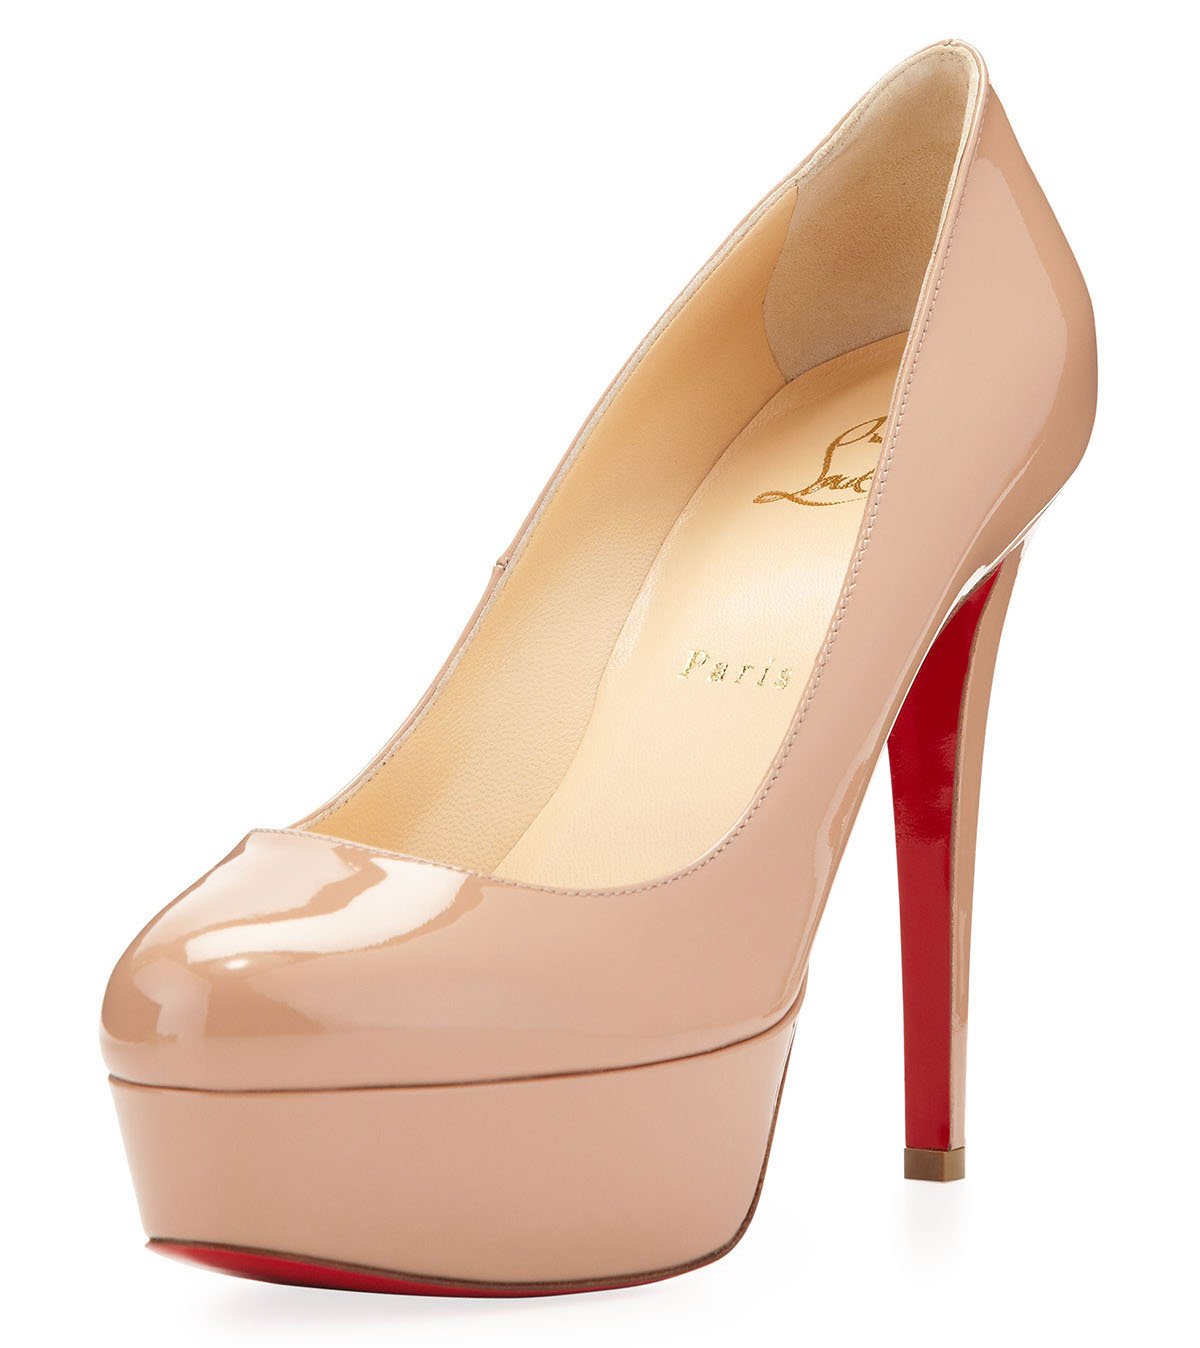 Defined by their distinctive round toes and platform design, the Christian Louboutin Bianca pumps offer a classic yet bold aesthetic, providing both comfort and a statement-making style that elevates any outfit